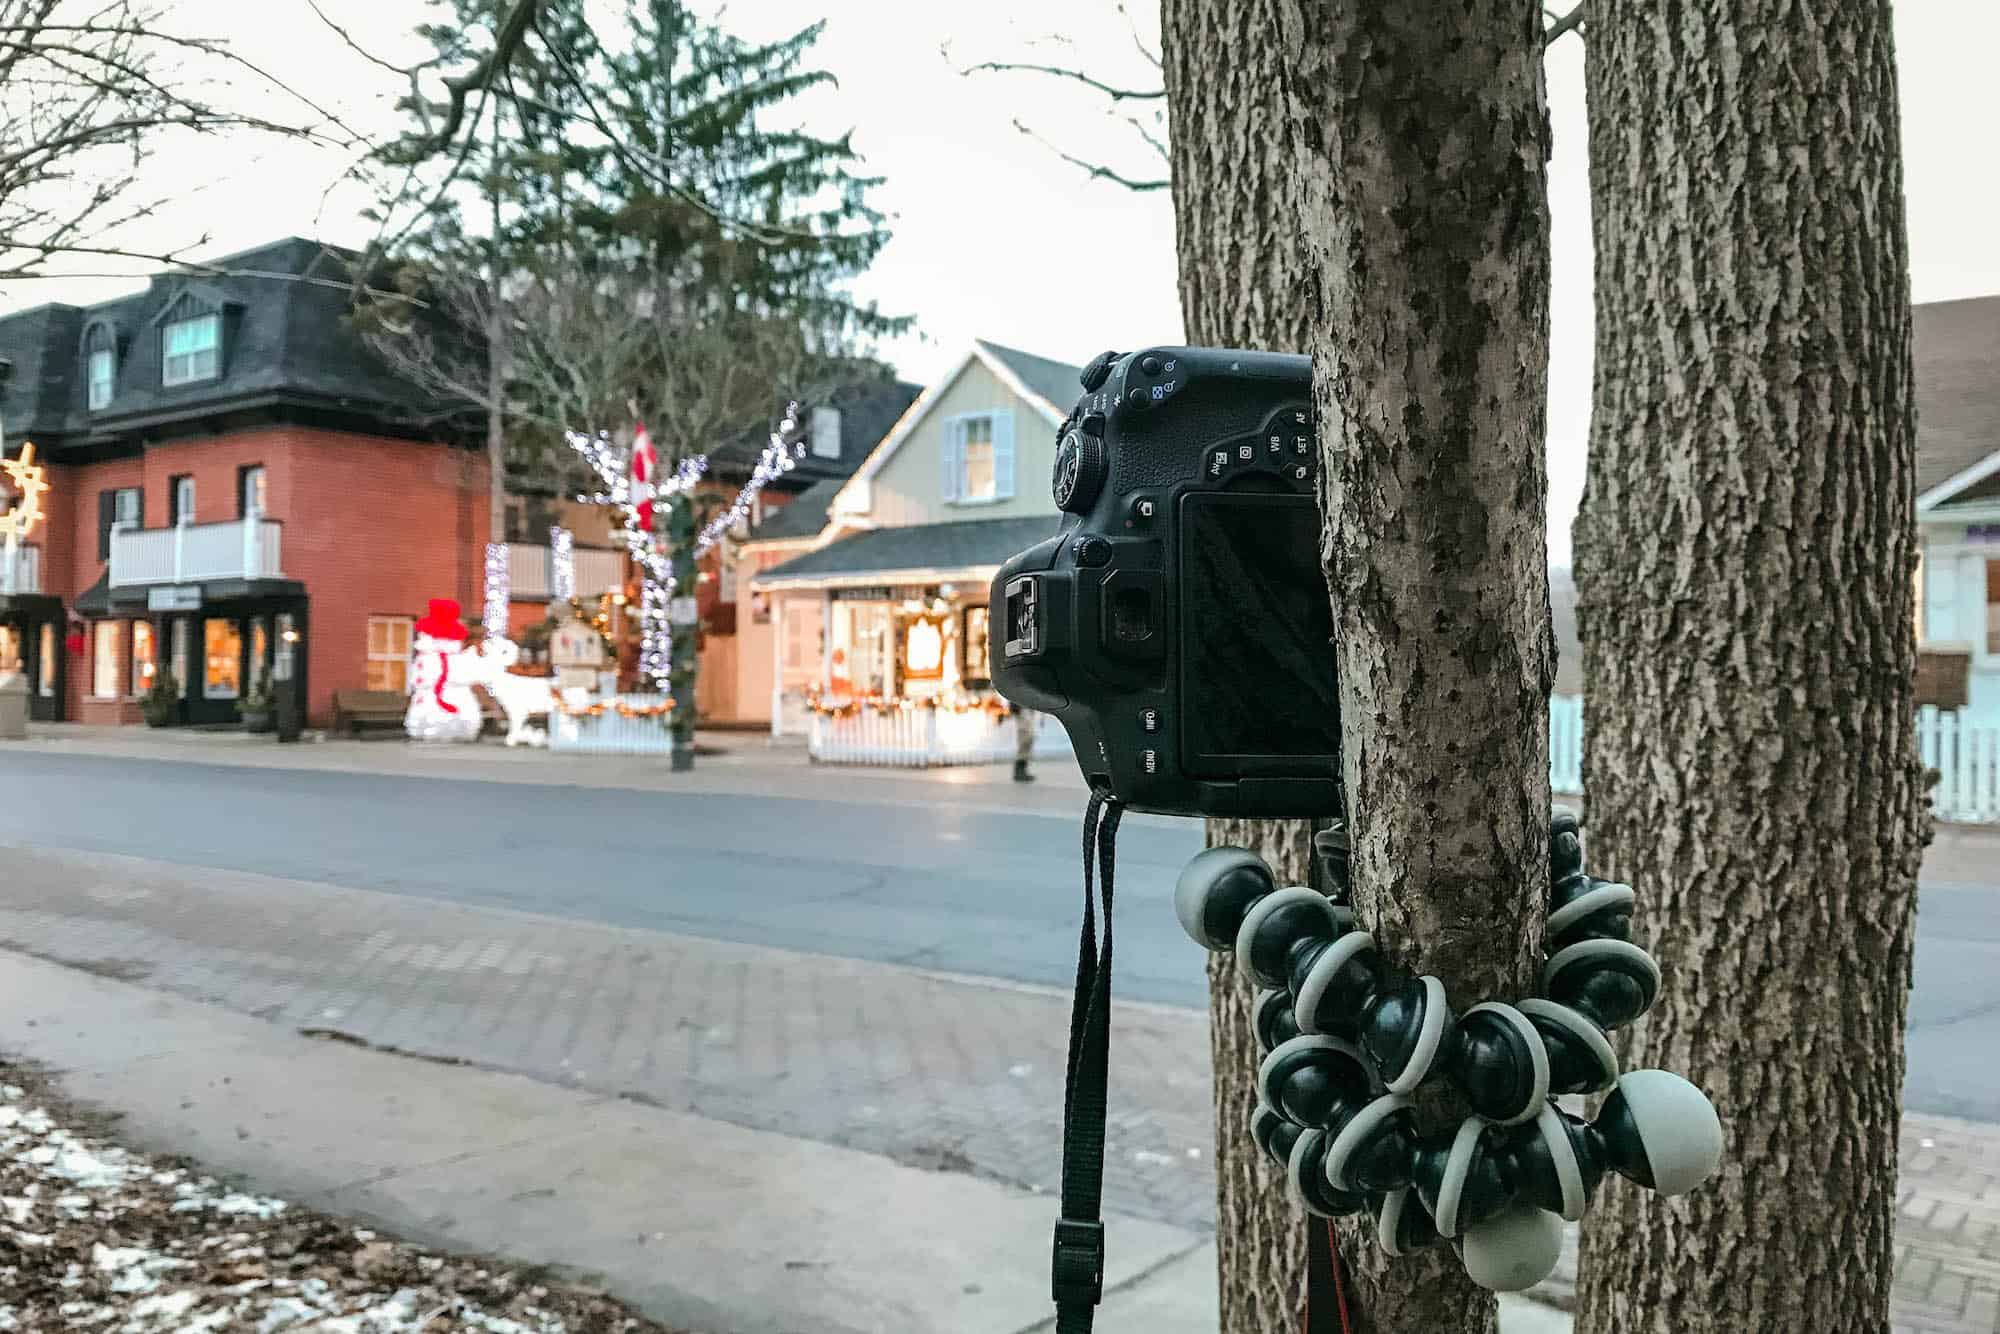 How to shoot good Instagram photos by yourself in public